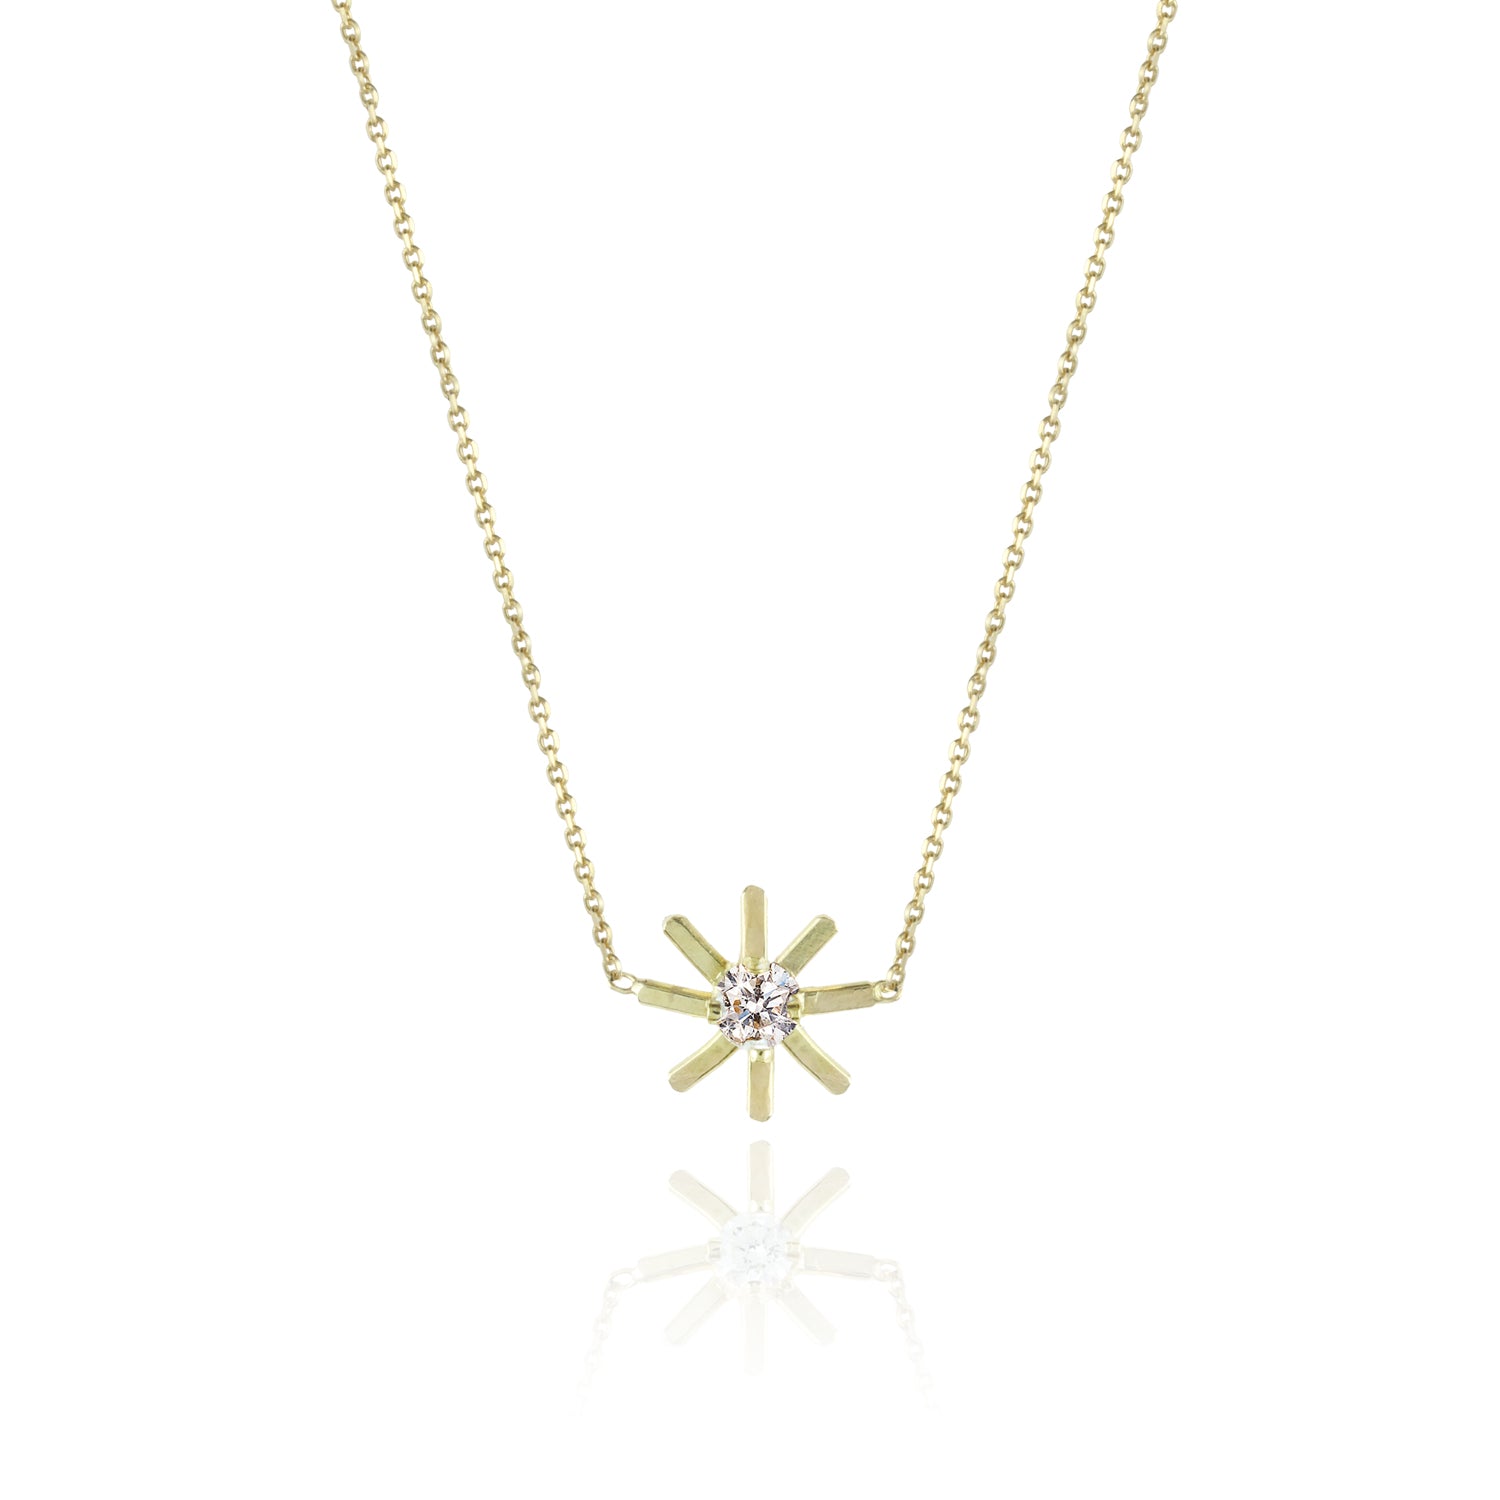 These 18ct yellow gold fine chain necklace is from our Pop Up Daisy Collection. The Flower motif is made up from fine gold petals and features a central Diamond set collet.